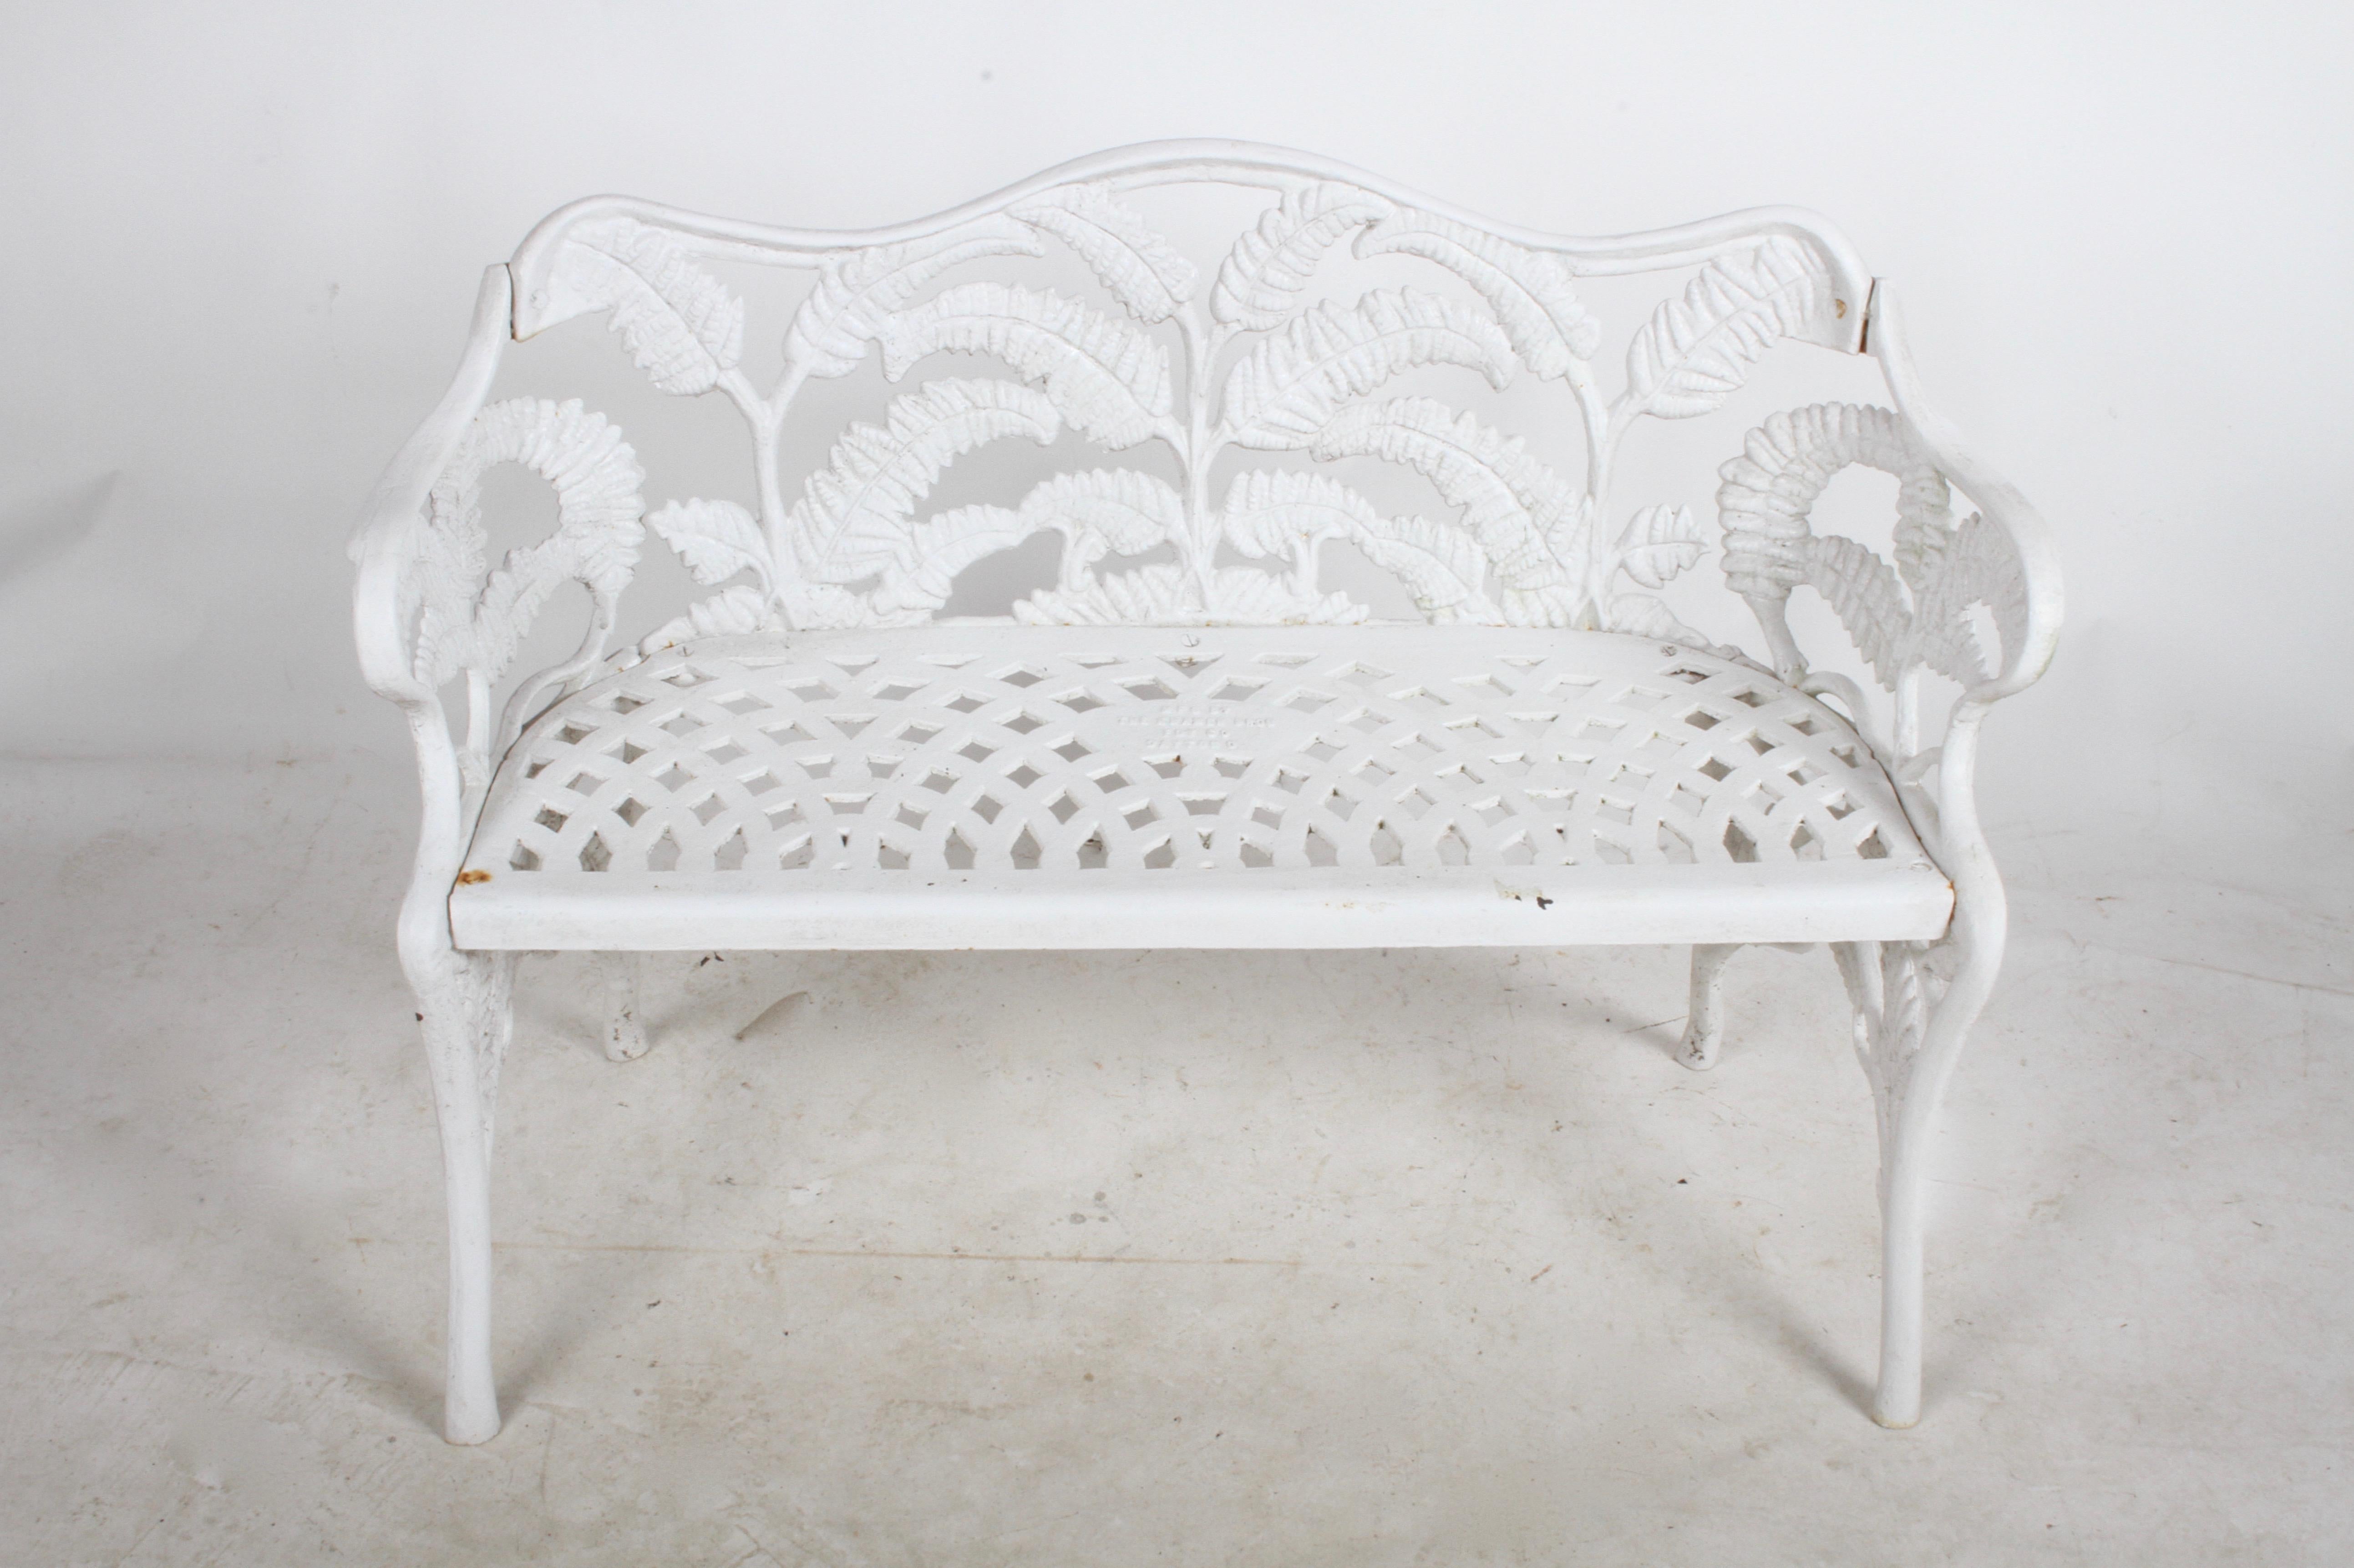 Kramer Brothers fern pattern cast iron bench with several older coats of white paint, some wear and light rust. Retains foundry stamp. Can be repainted, sand blasted, dipped in rust inhibitor for additional cost. Very heavy, well made cast iron